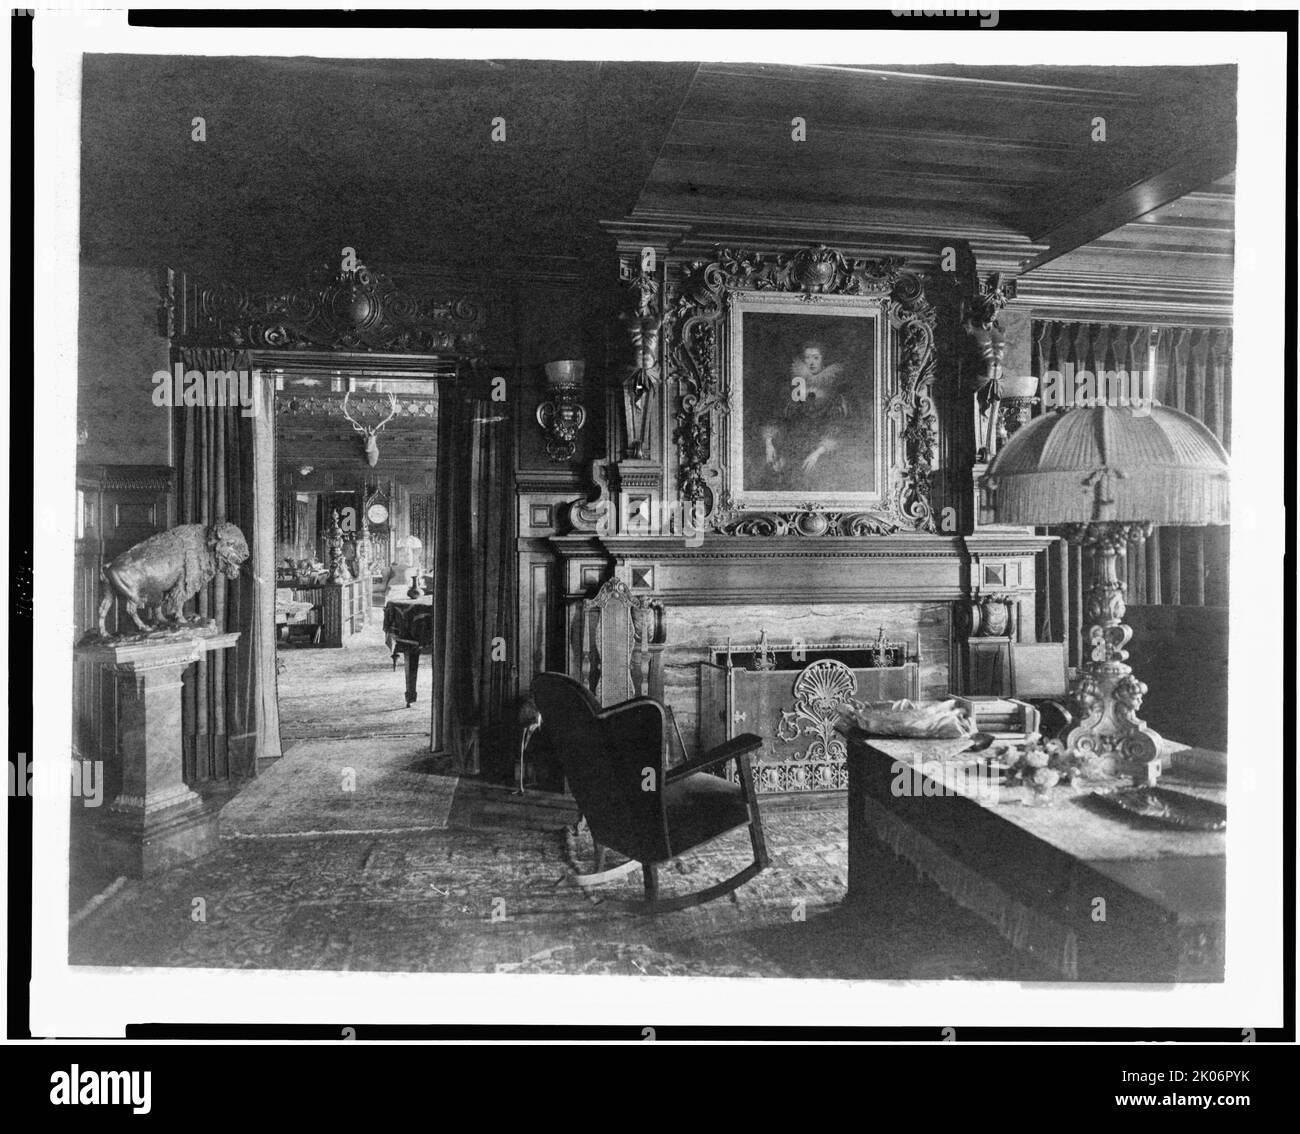 Study with portrait of woman in Elizabethan dress, over fireplace, fringe lamp at right, and buffalo statue on left; elk head on wall and grandfather clock in background, in home of Edmund Cogswell Converse, Greenwich, Connecticut, 1908. The Conyers Farm estate, designed by Donn Barber c1904, was owned by businessman Edmund C. Converse. Stock Photo